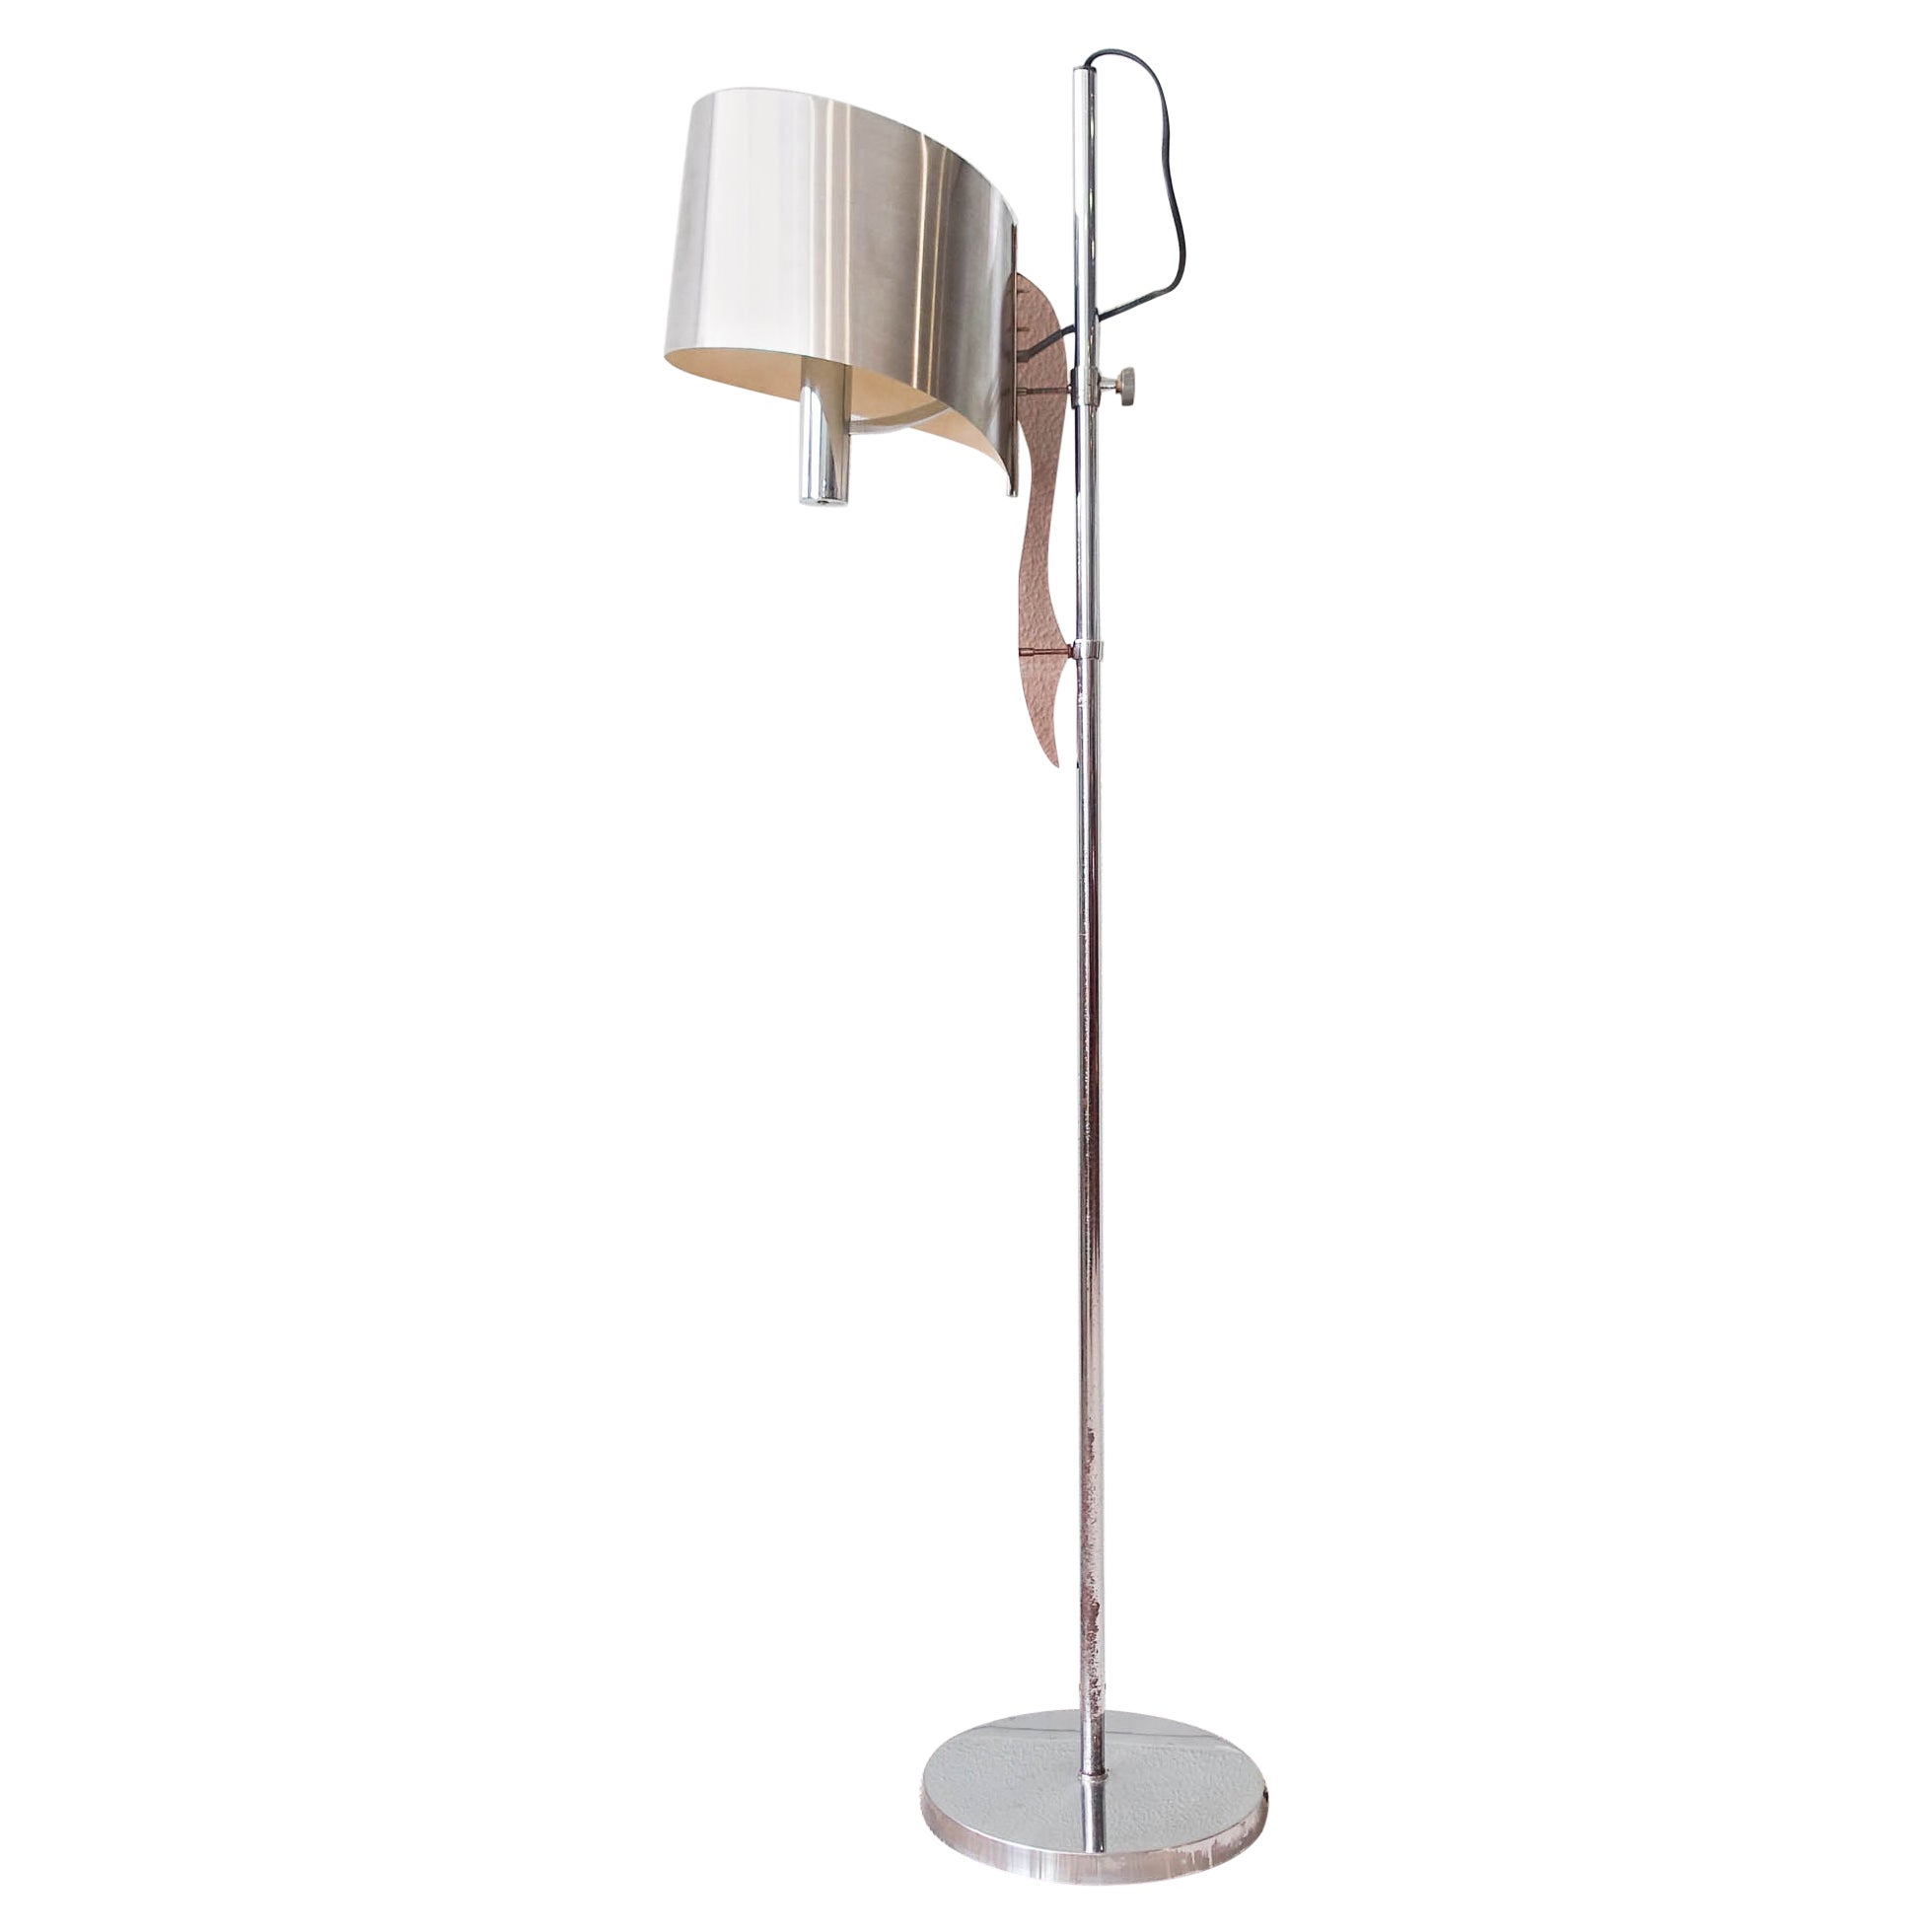 French Sculptural Floor Lamp "Ruban" By Jacques Charles for Maison Charles For Sale